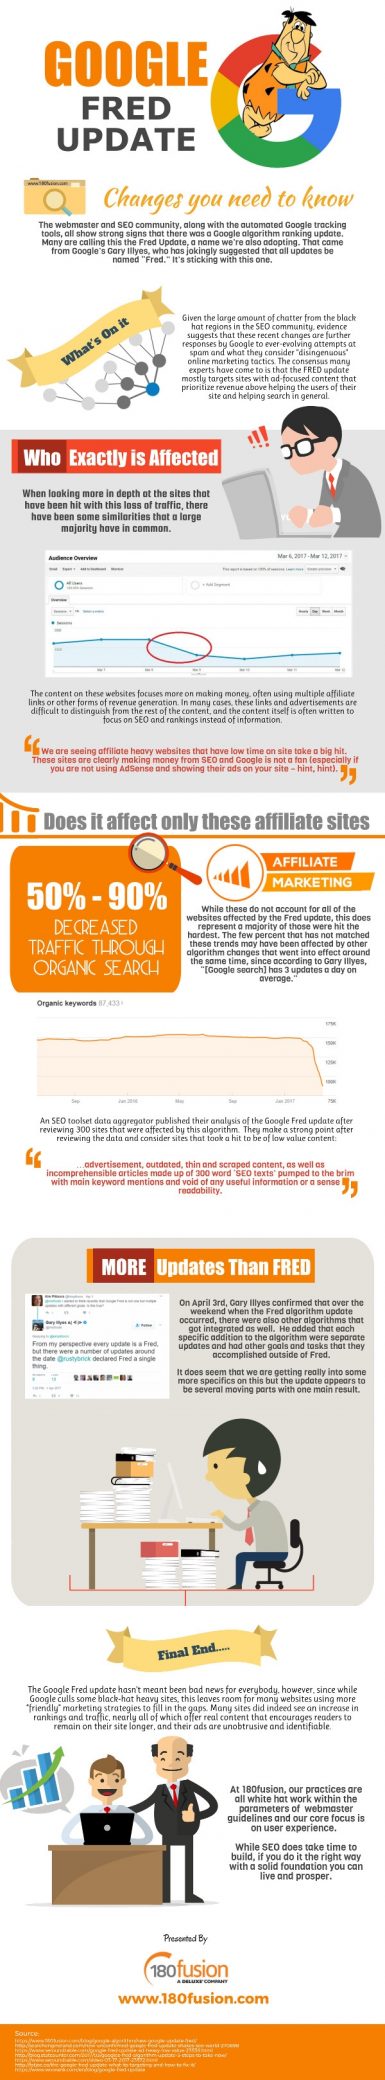 Google Updates Its Algorithm. Again. Meet Fred. [Infographic]